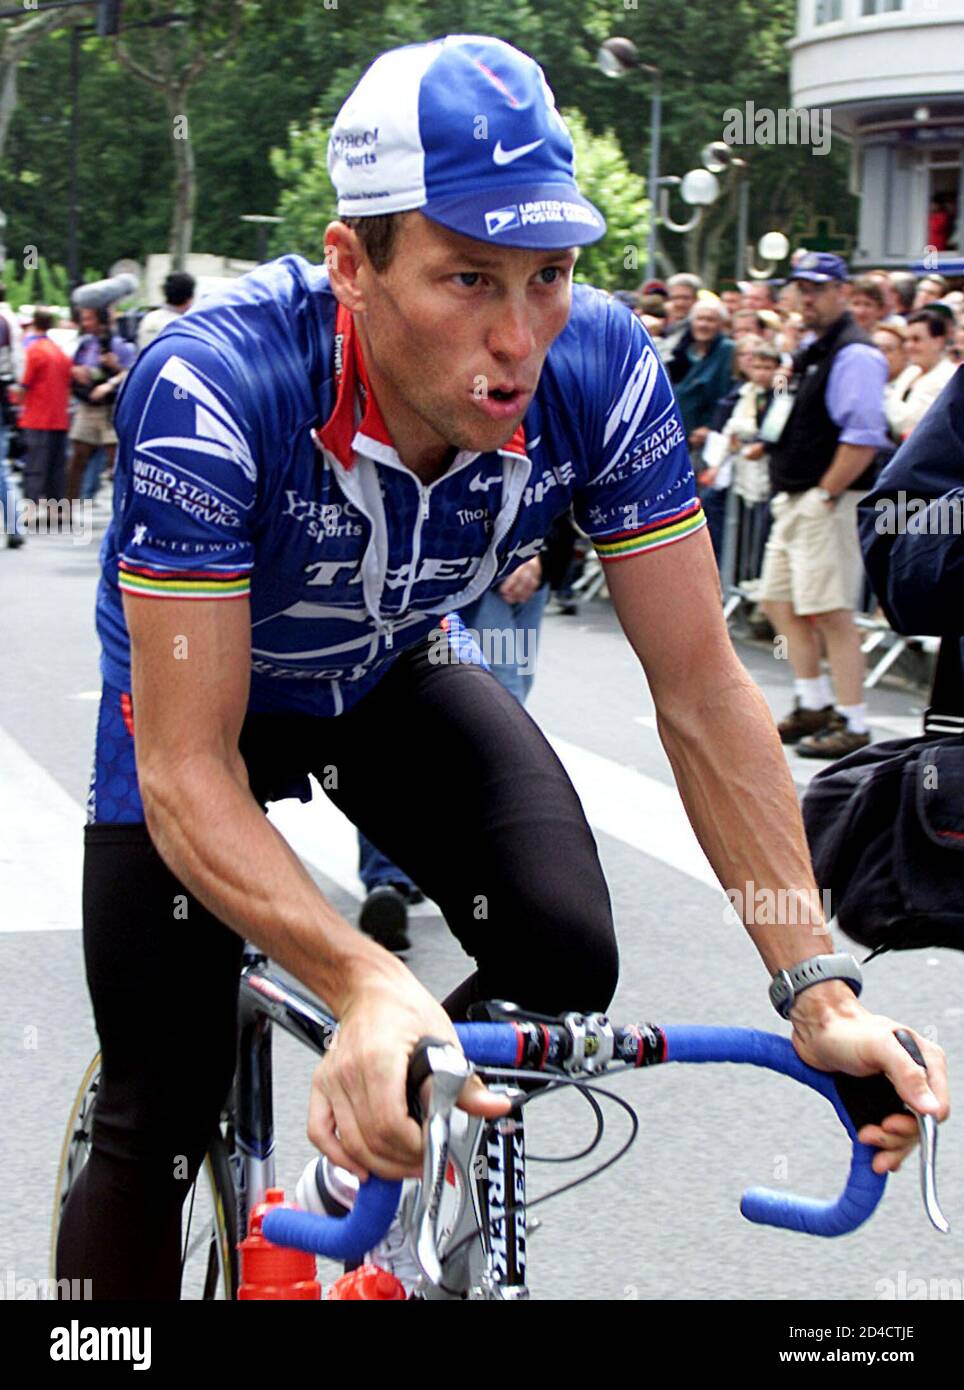 US Postal Service team leader Lance Armstrong of the USA rides at the start  of the 188km twelfth stage of theTour de France cycling race from Perpignan  to Ax-les-Thermes in the Pyrenees